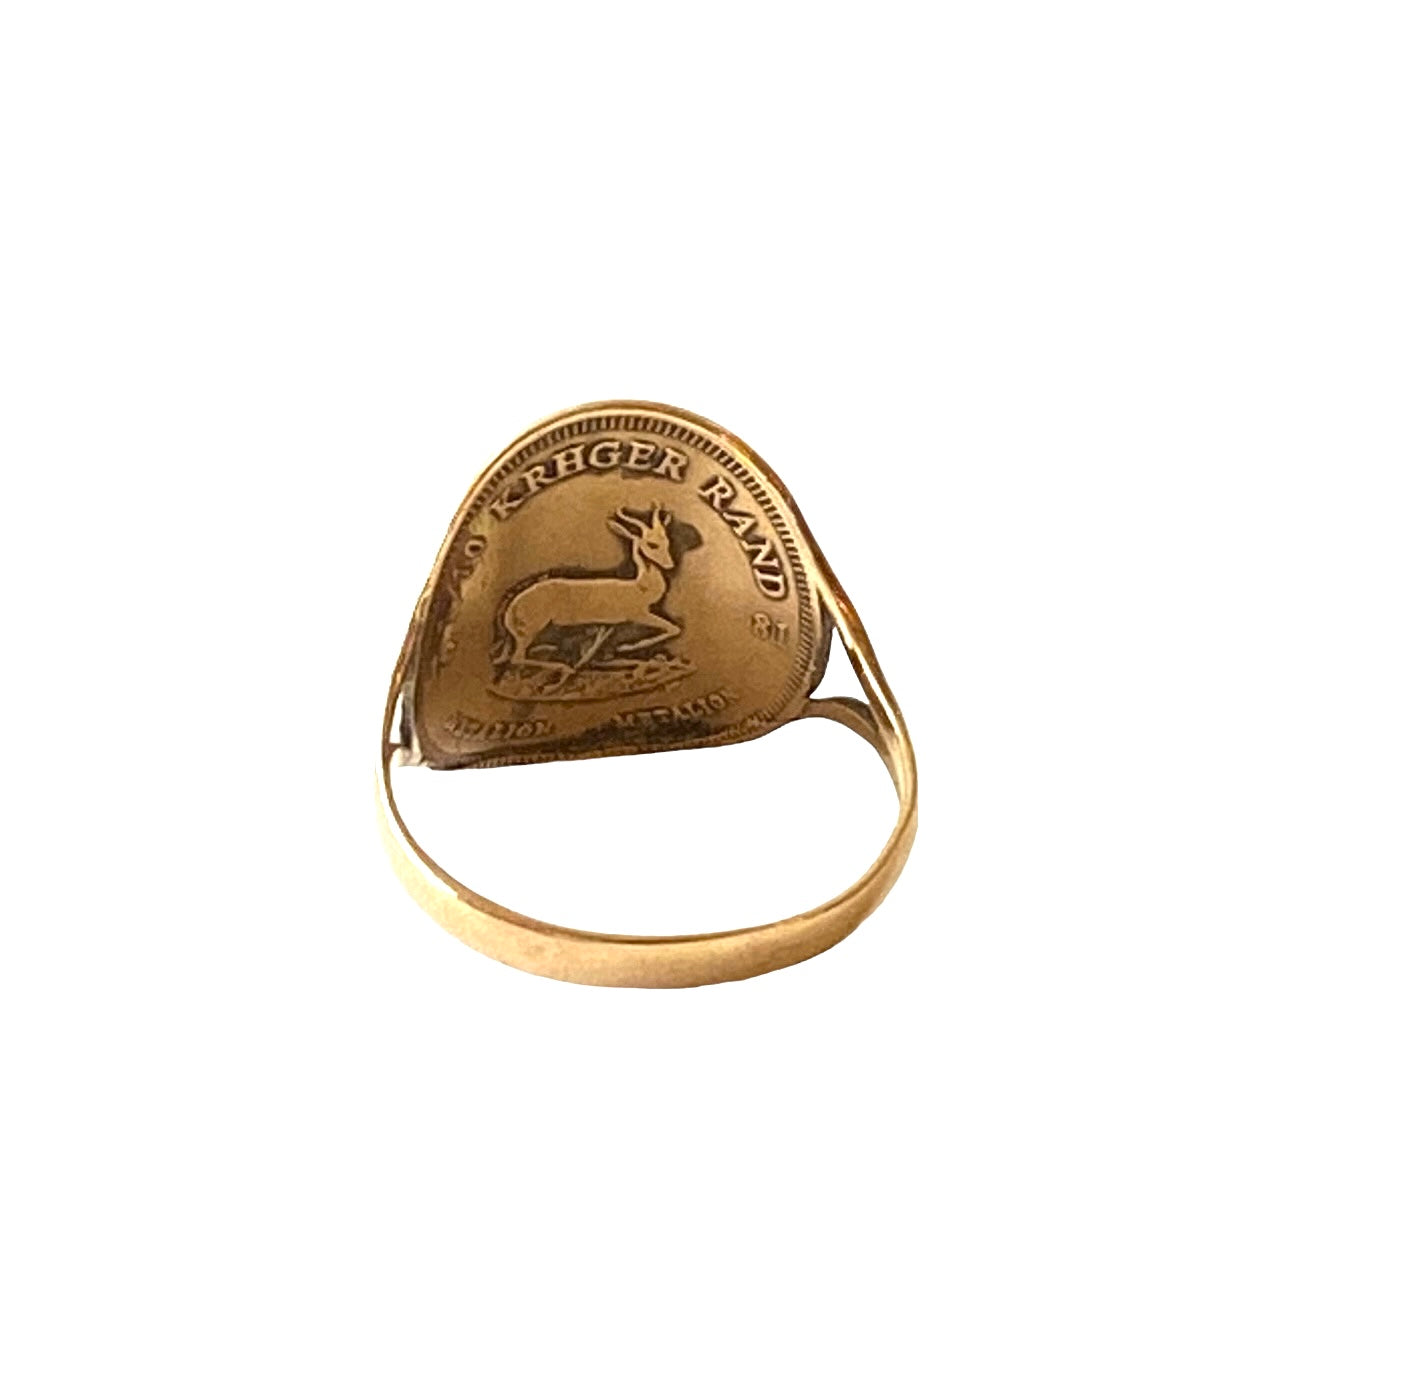 9ct vintage ring size T. St George on the front and krugerrand on the reverse